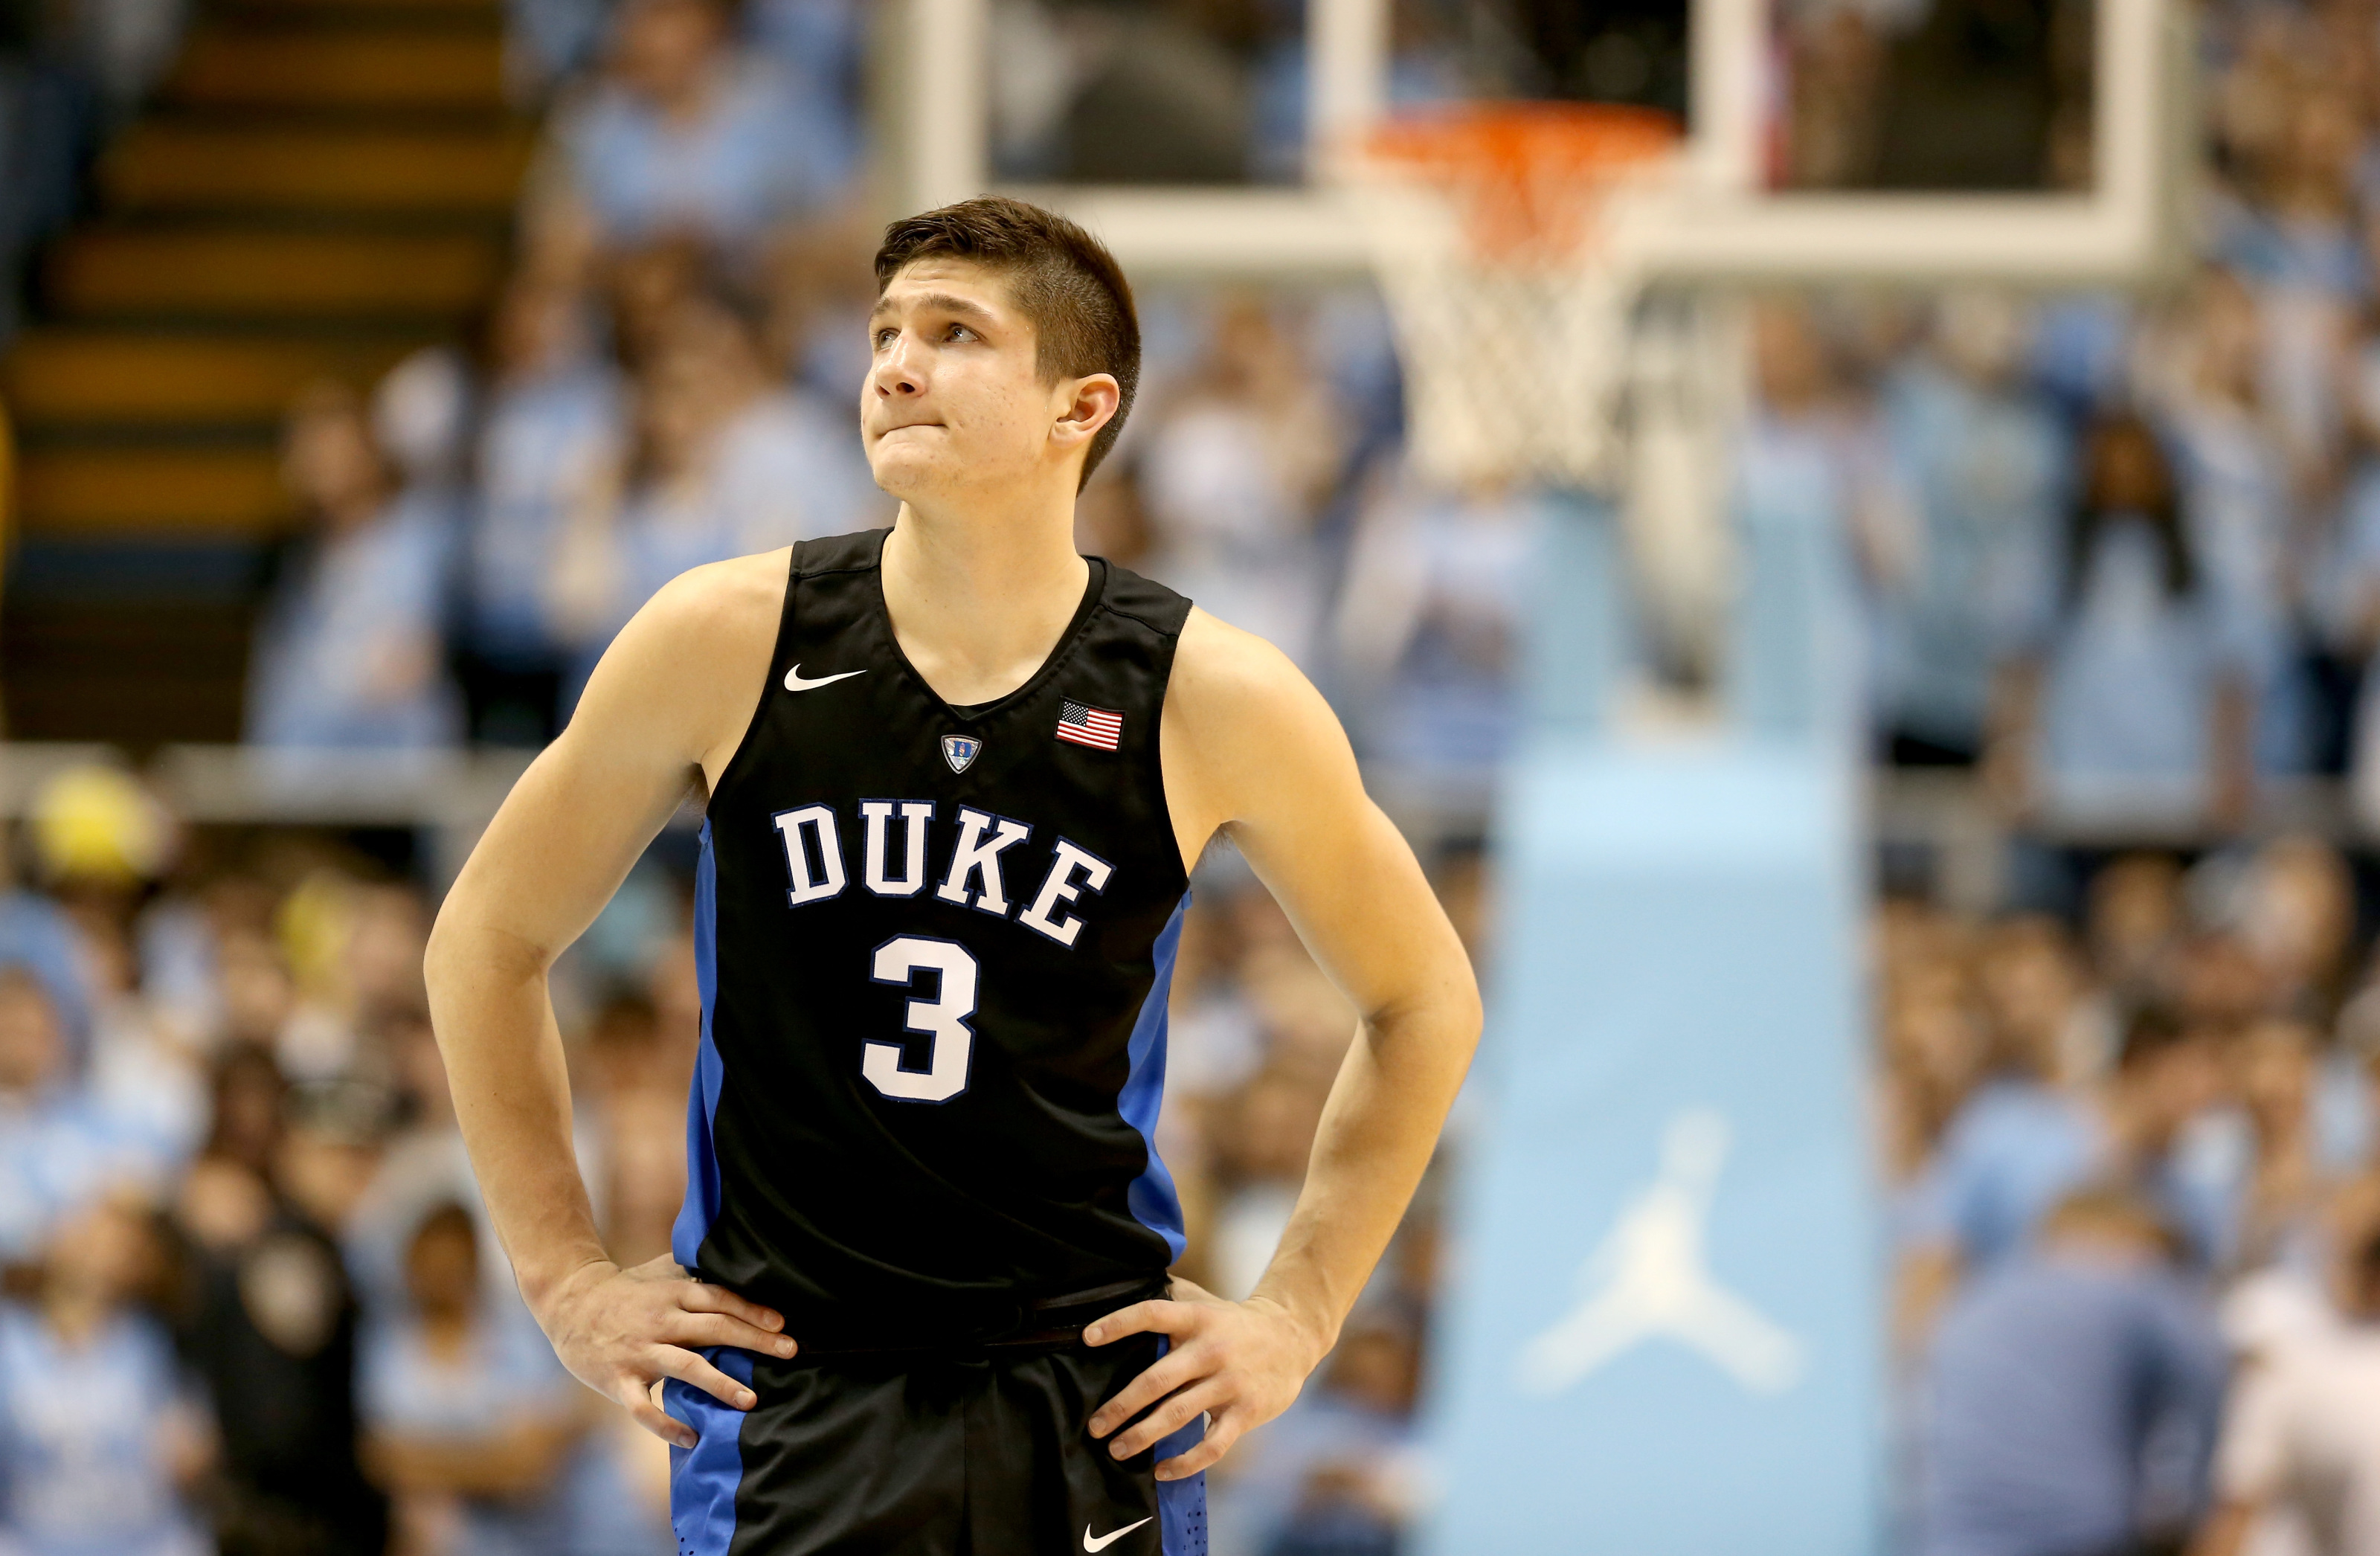 JJ Redick, Grayson Allen Debate Who Fans Hated More During Duke Years